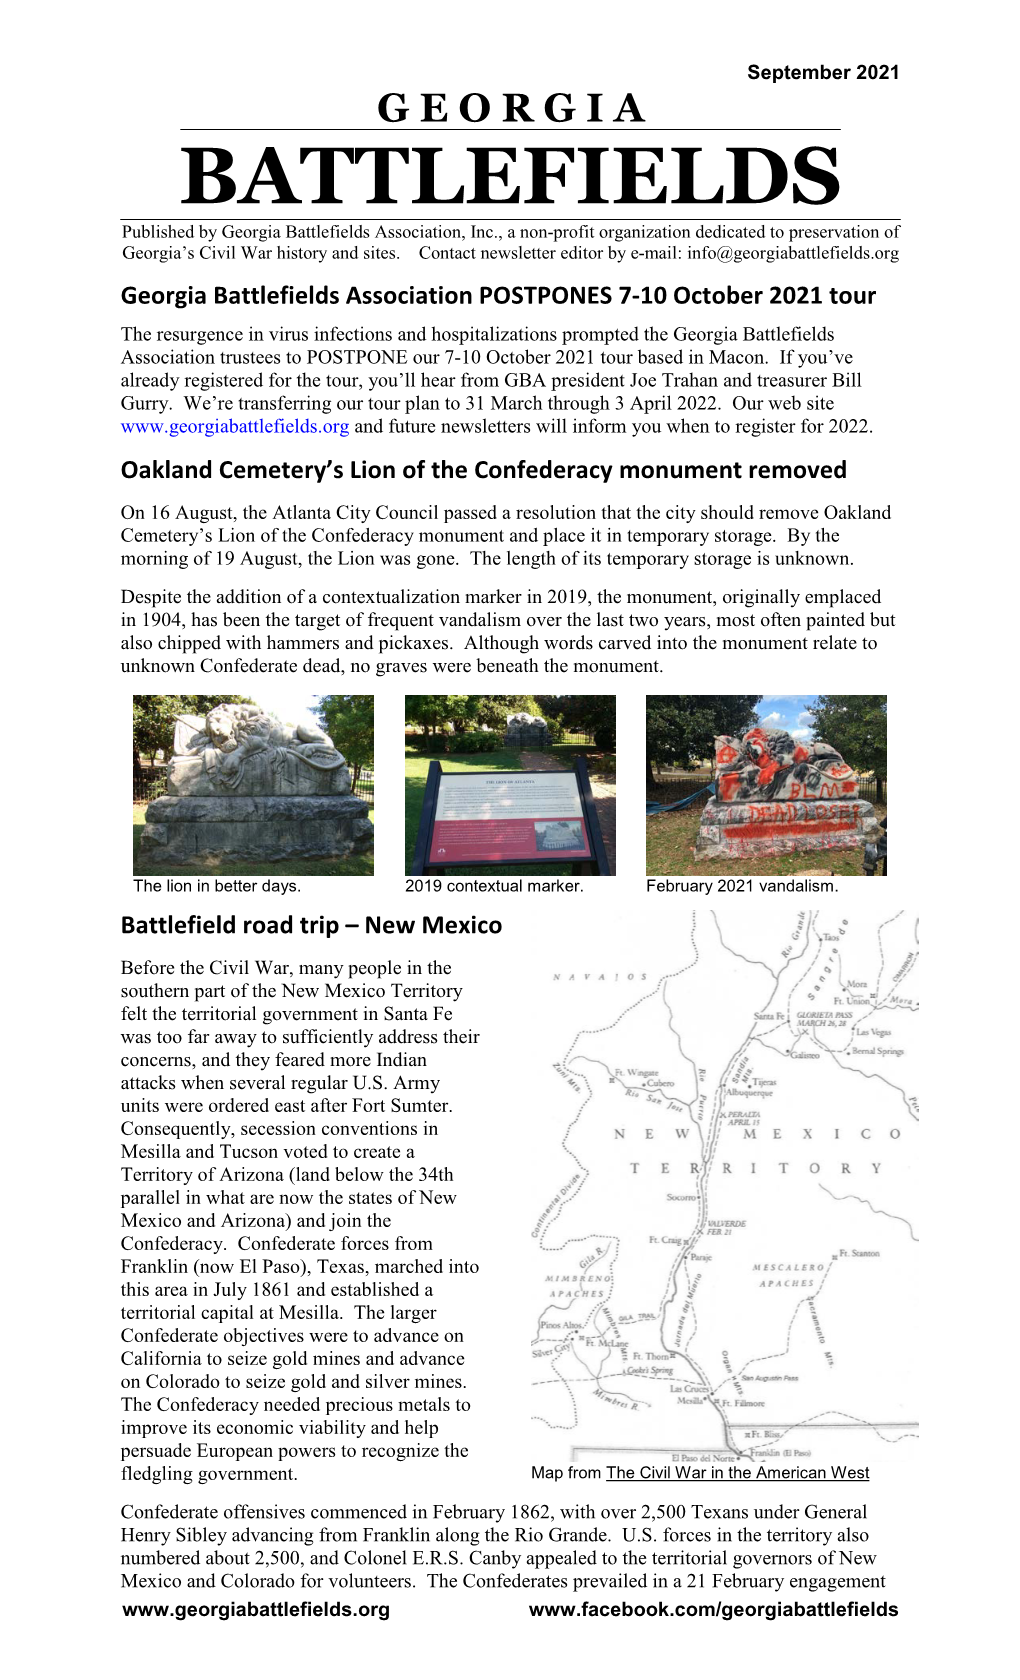 BATTLEFIELDS Published by Georgia Battlefields Association, Inc., a Non-Profit Organization Dedicated to Preservation of Georgia’S Civil War History and Sites